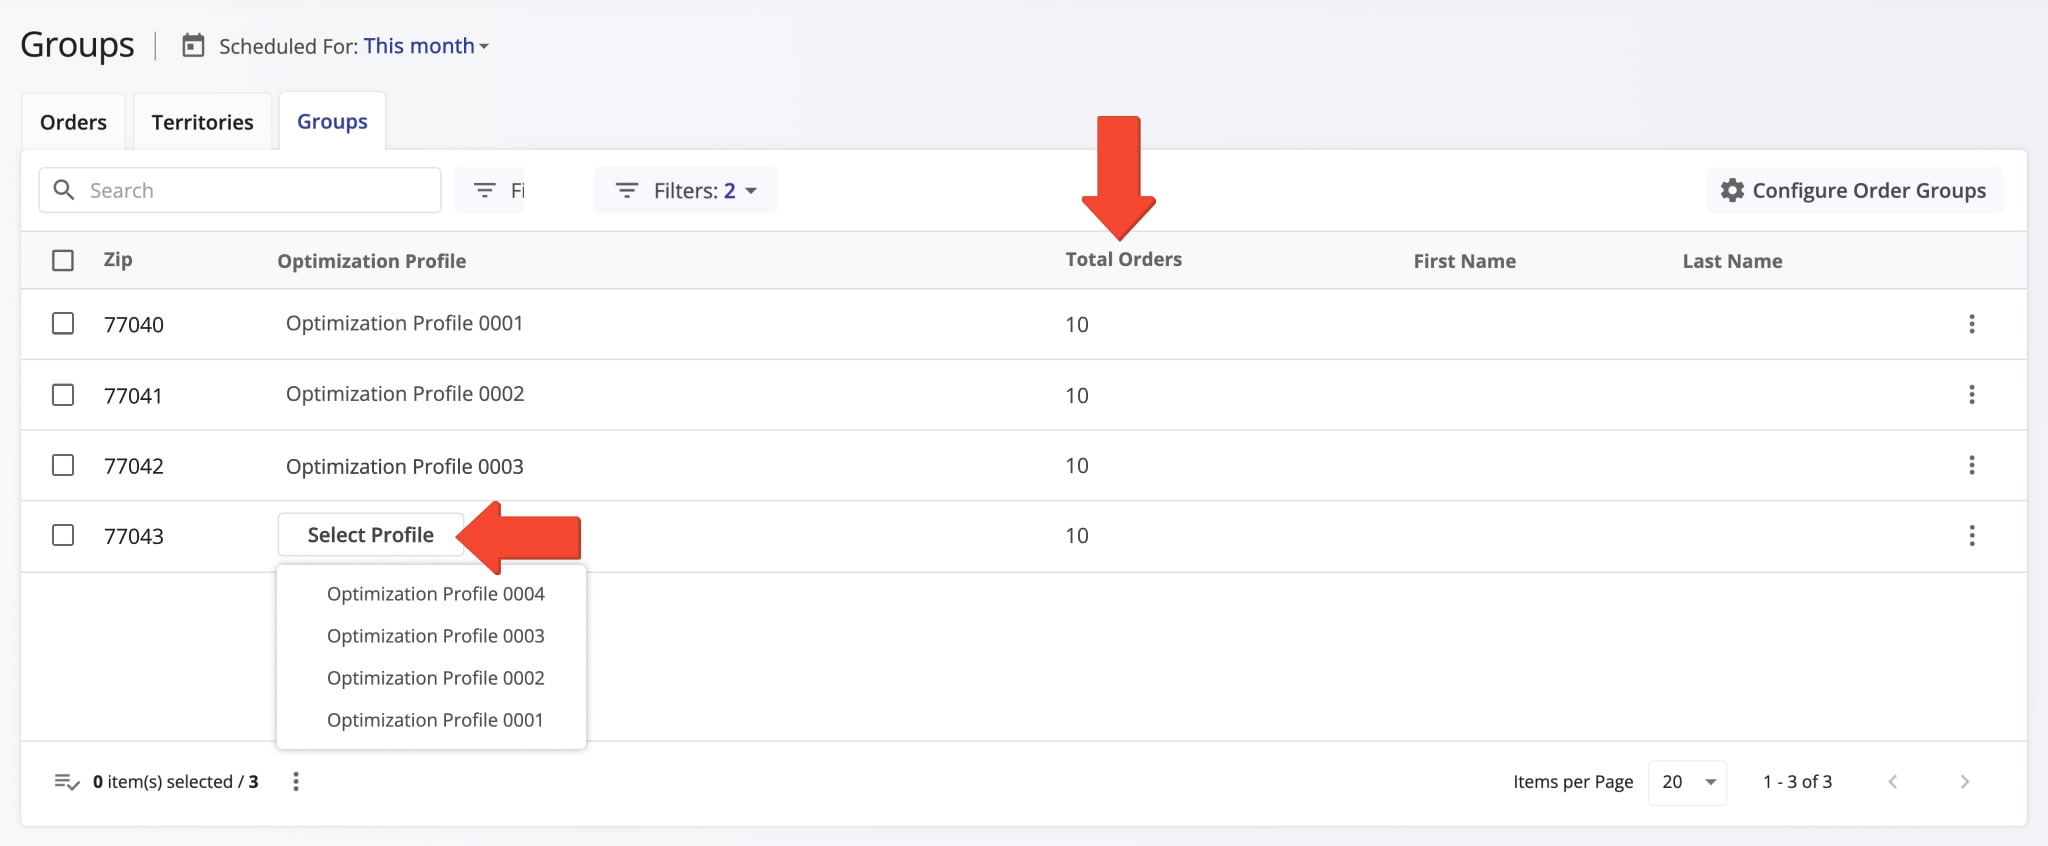 After filtering Order Groups, the Total Orders column will show the total number of orders that match those filters. Then, click the Select Profile button to set an Optimization Profile to an Order Group.